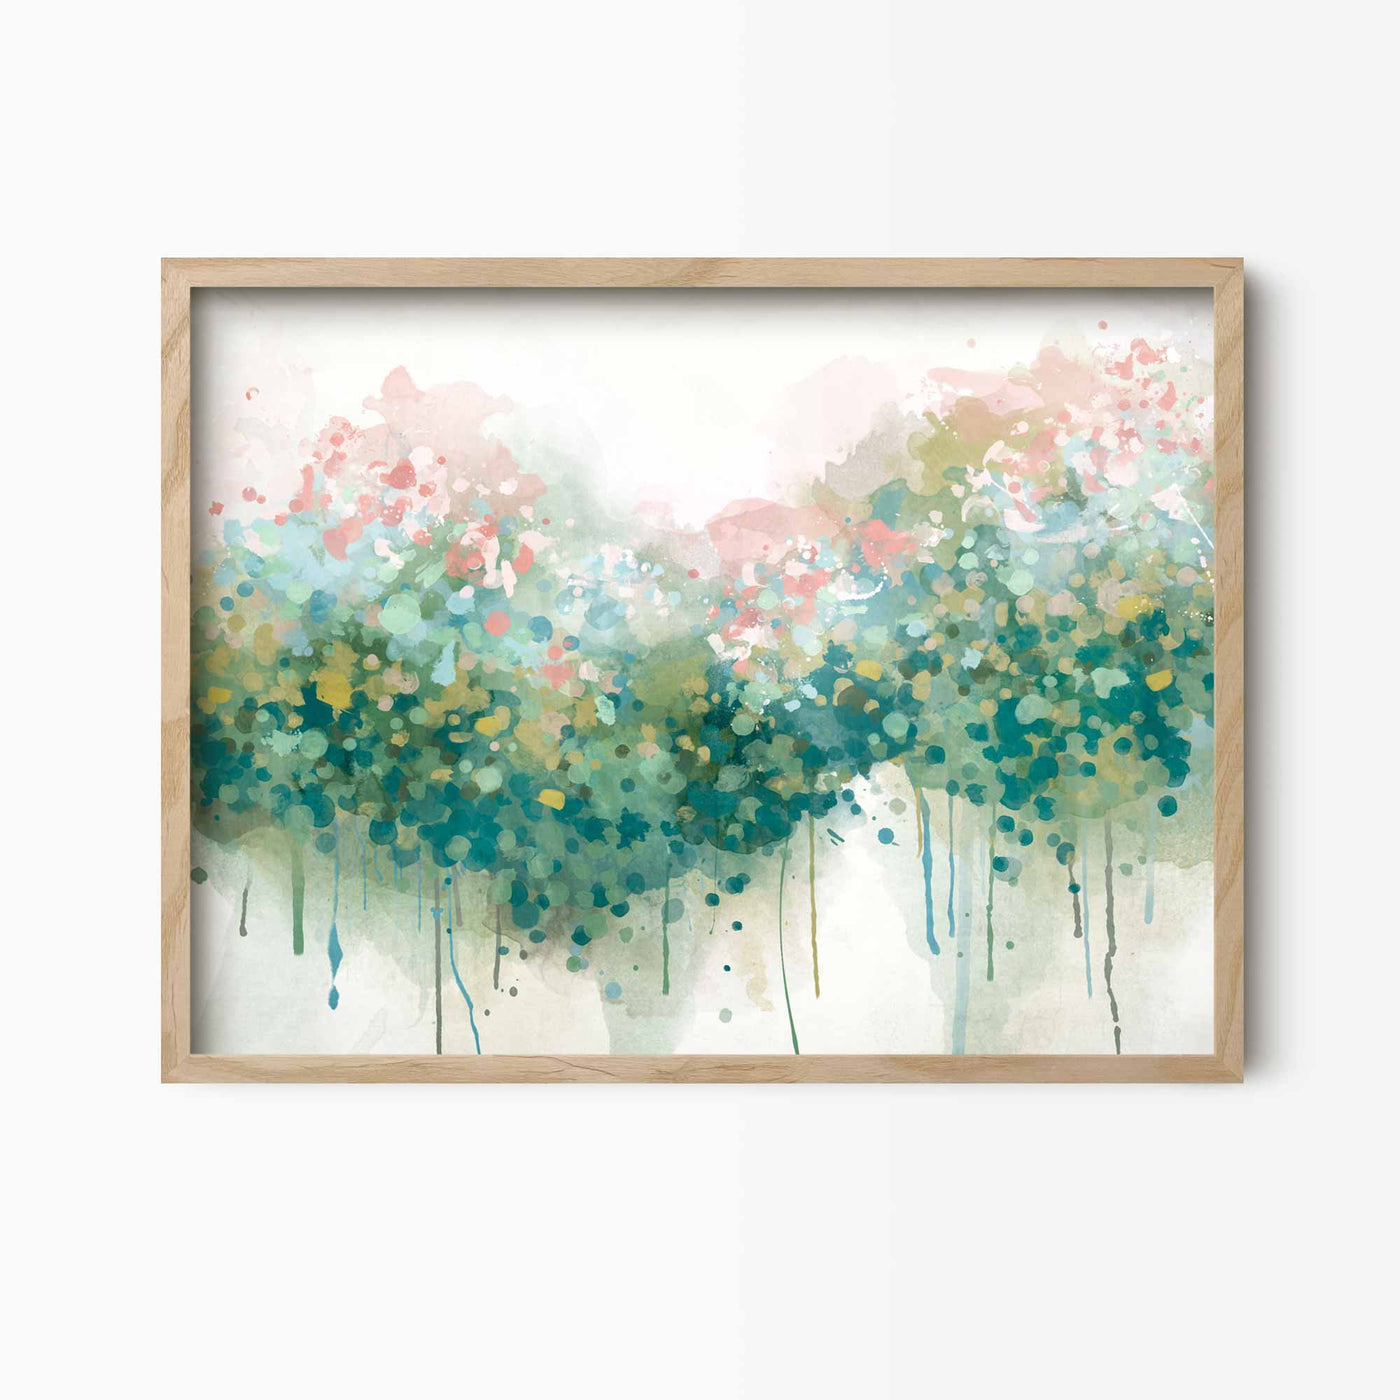 Green Lili 30x40cm (12x16") / Natural Frame The Real Teal Abstract Floral Art Print